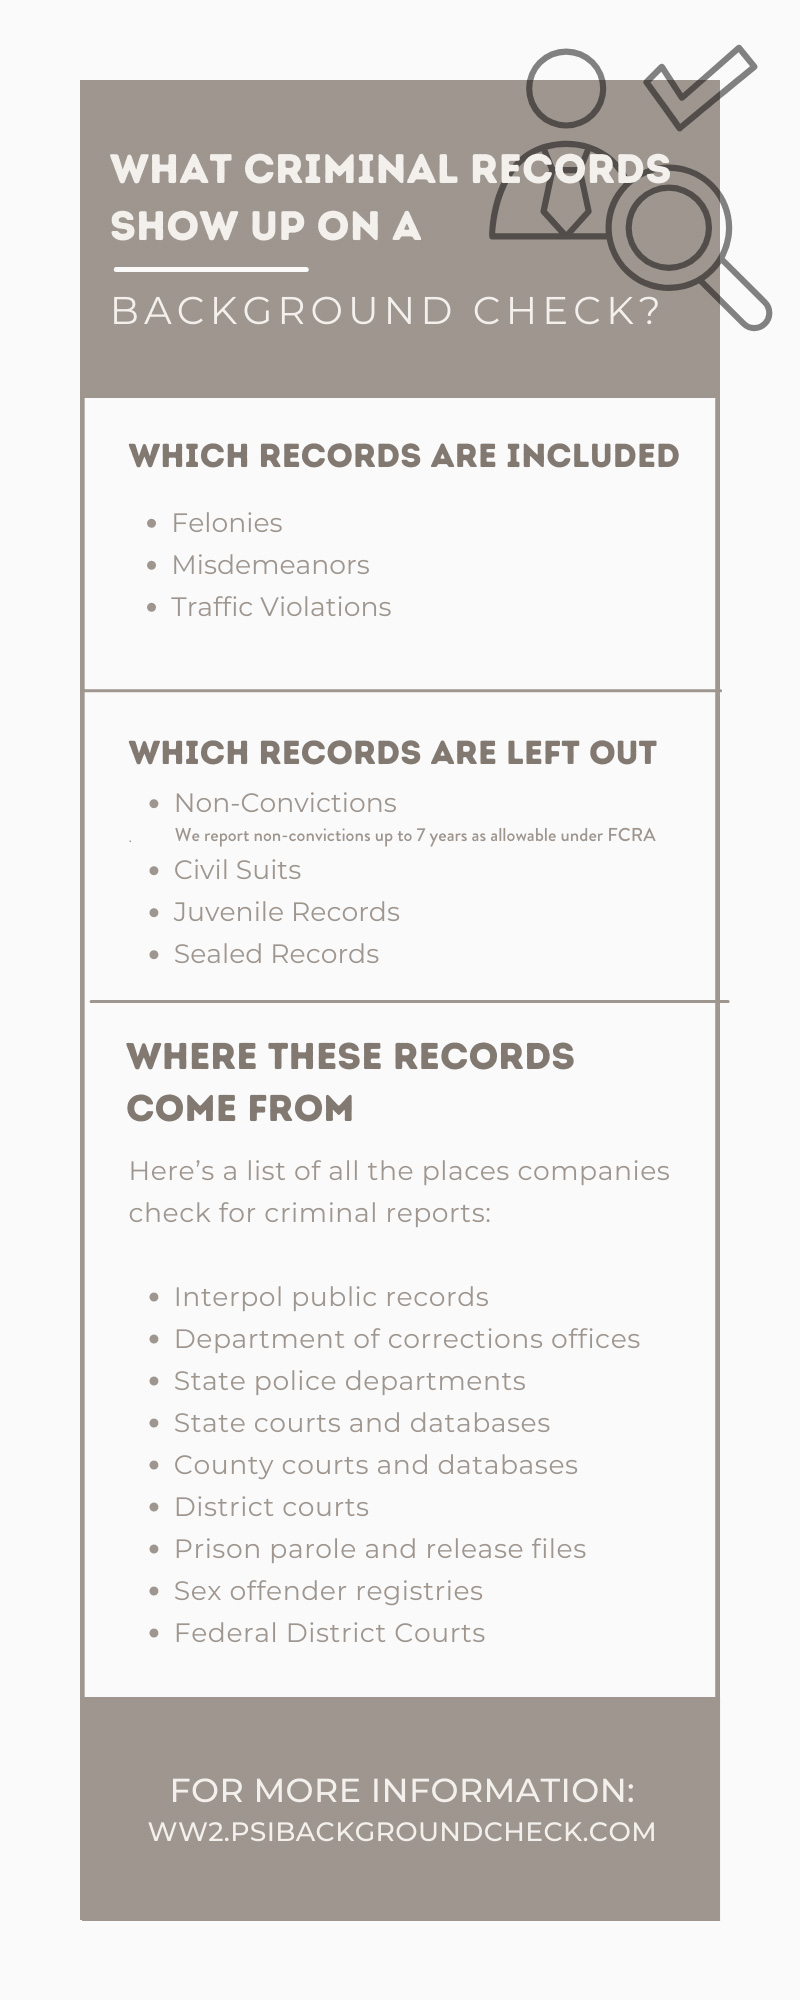 What Criminal Records Show Up on a Background Check?